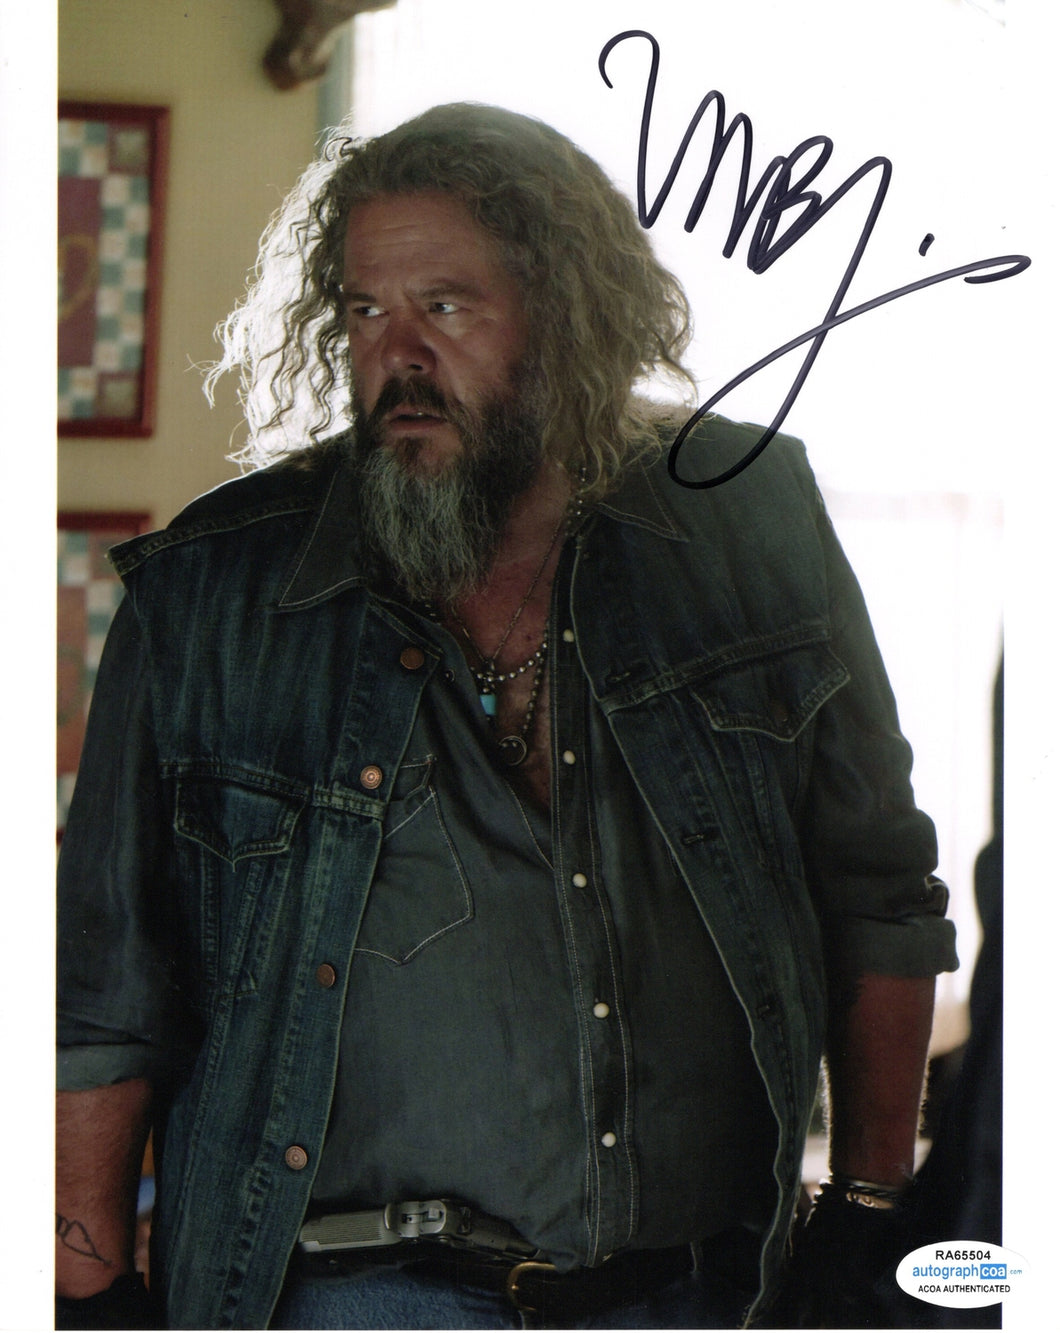 SONS OF ANARCHY Mark Boone Junior Autograph 8x10 Photo